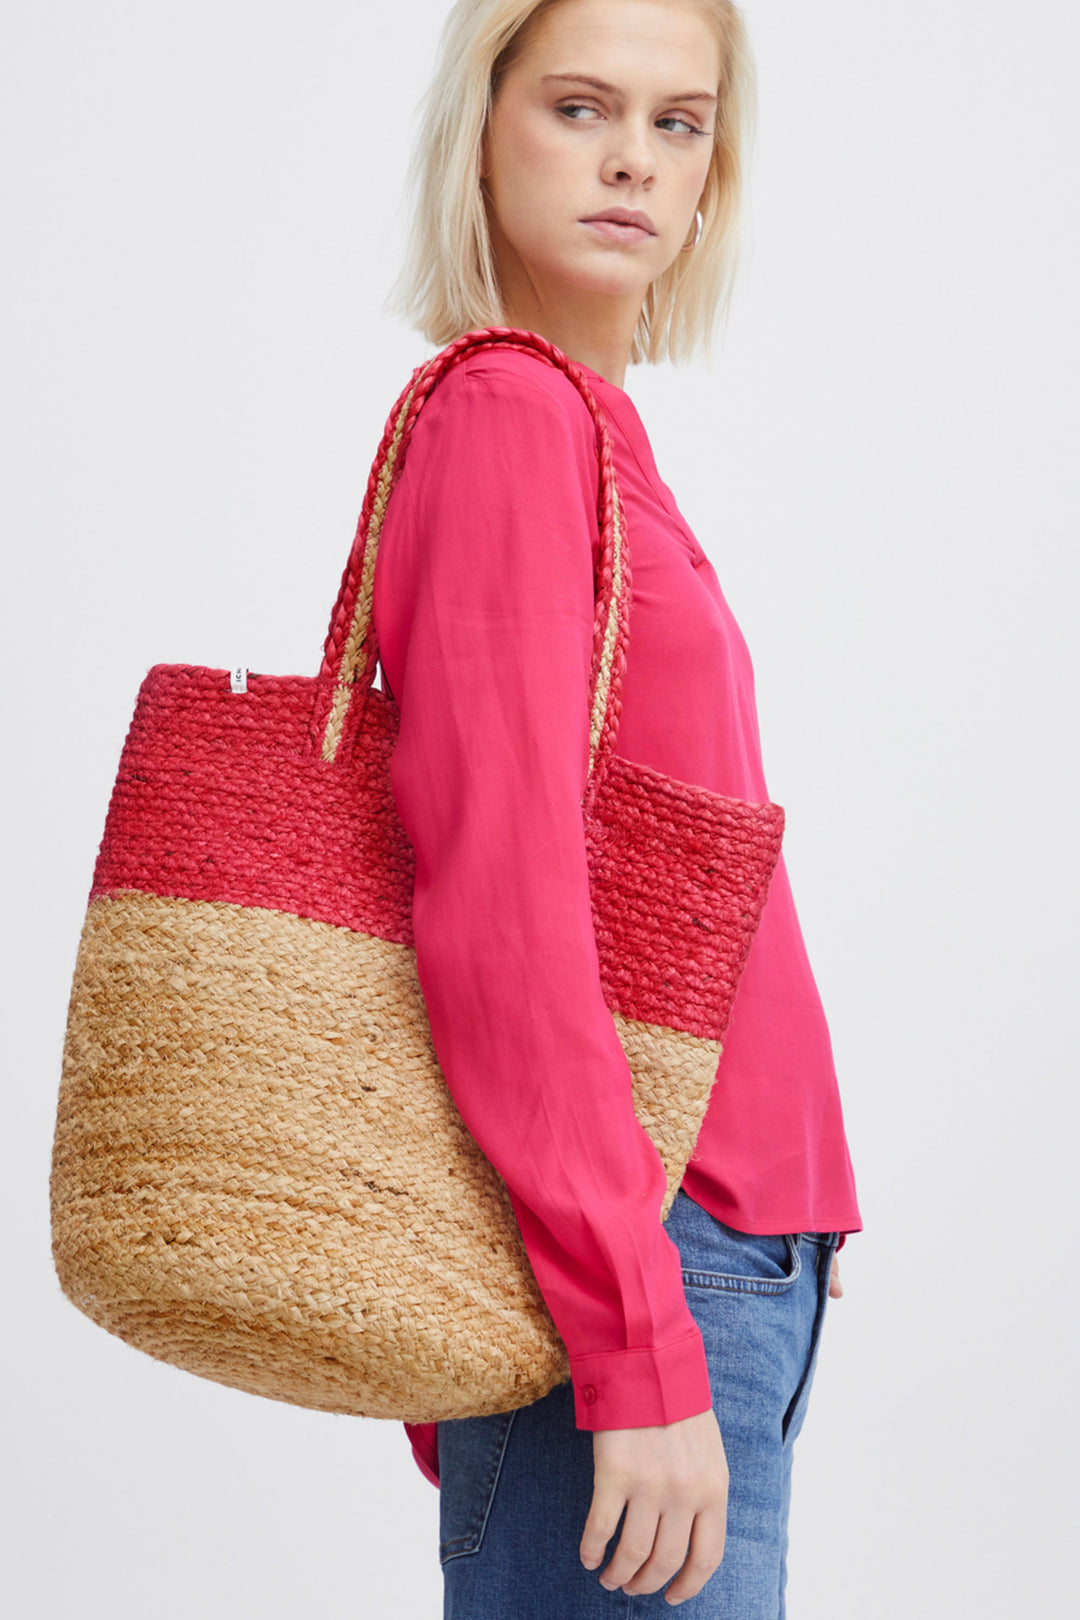 Ichi Summer 2024 The Colourblock Tote Bag is an all-natural jute basket bag that is perfect for the season!